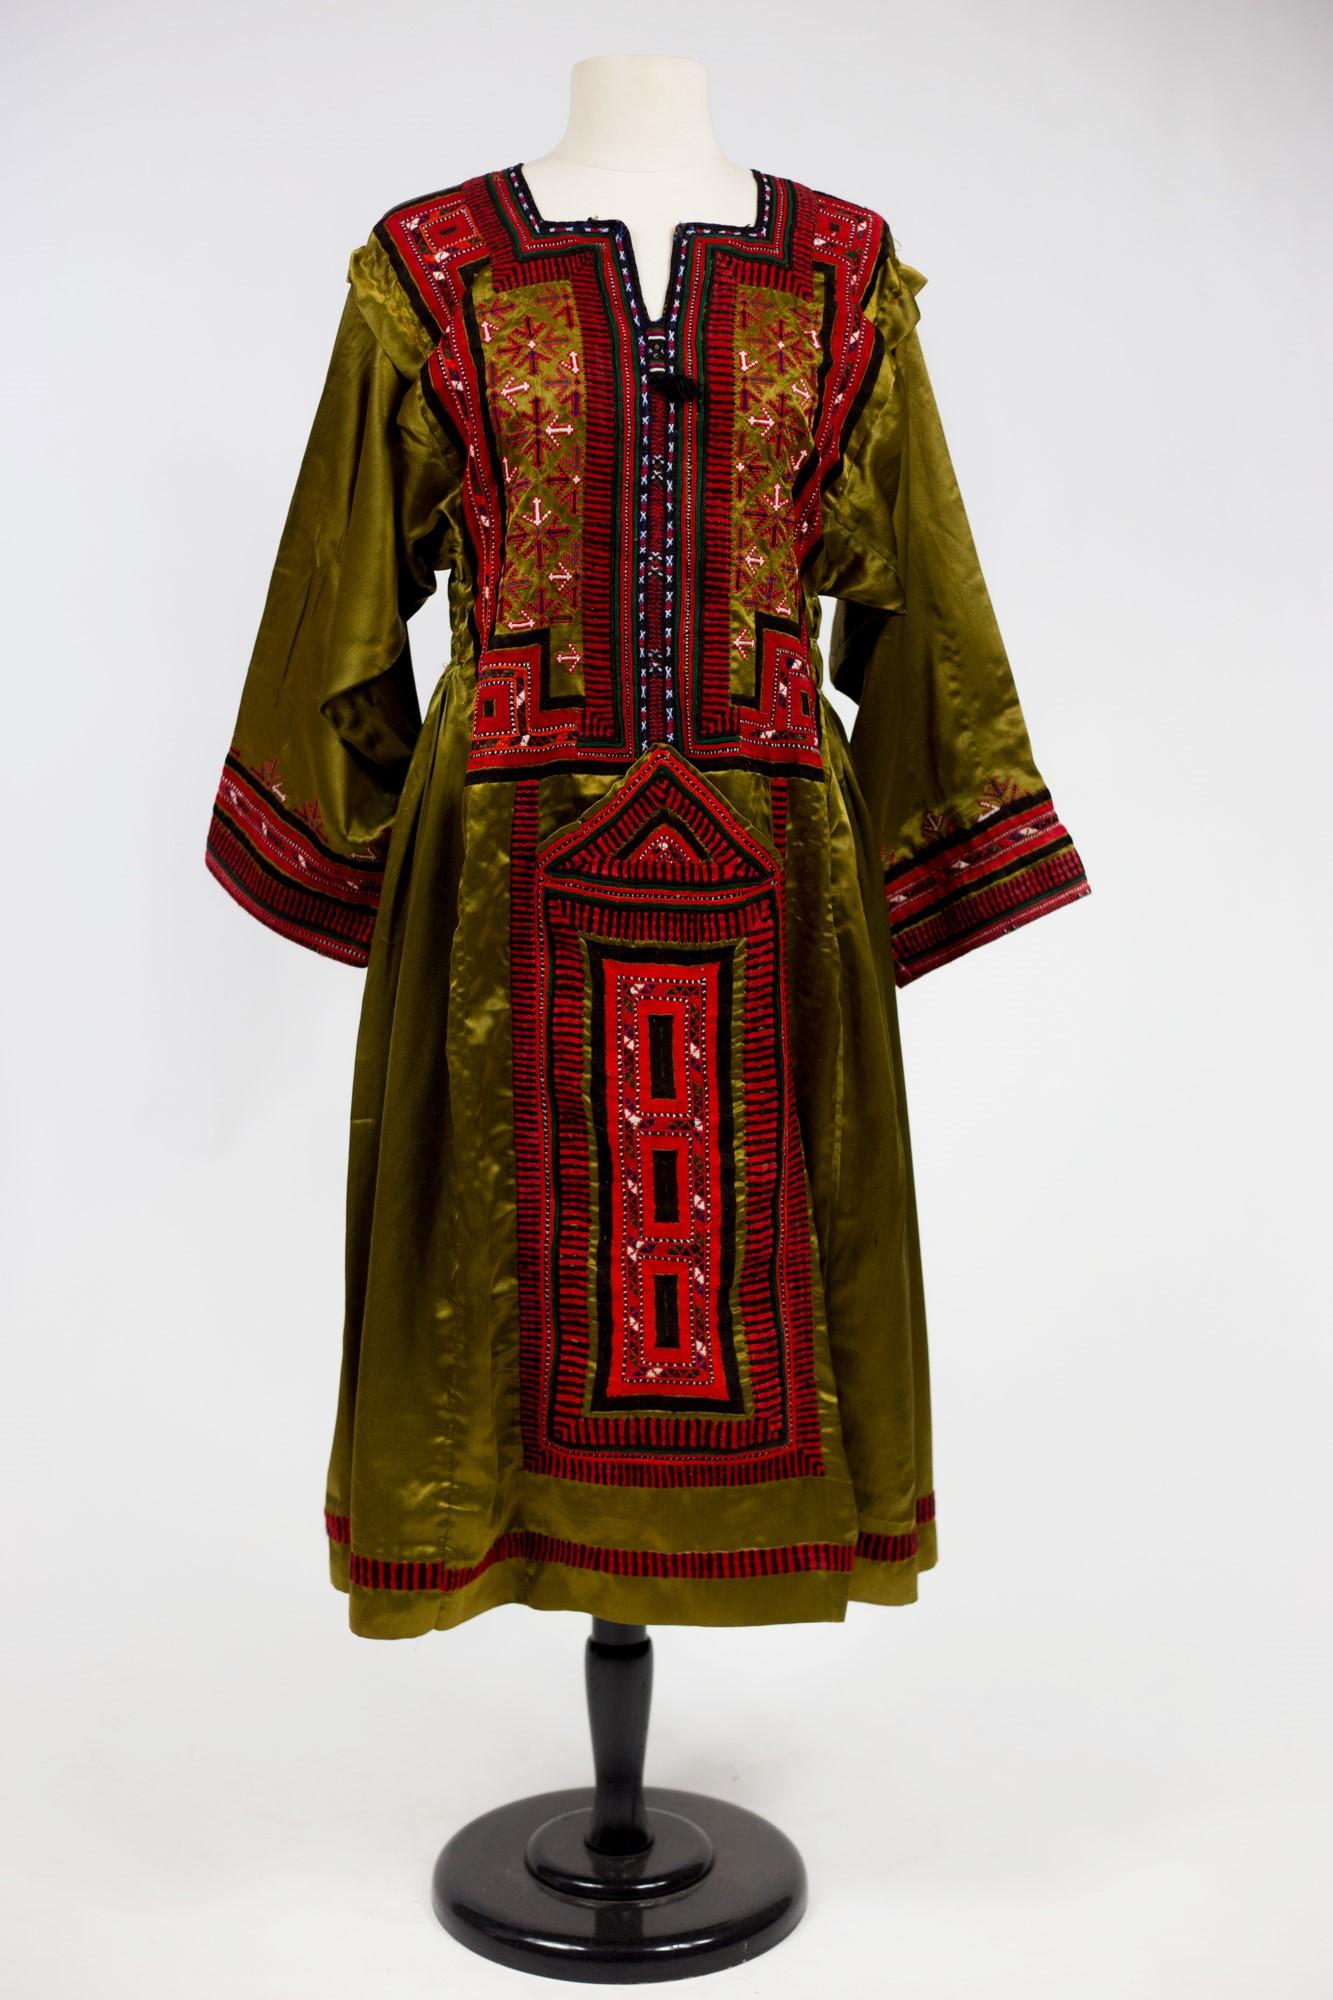 Brown An Ethnic Bronze Satin Blouse Embroidered Dress - India Circa 1970 For Sale